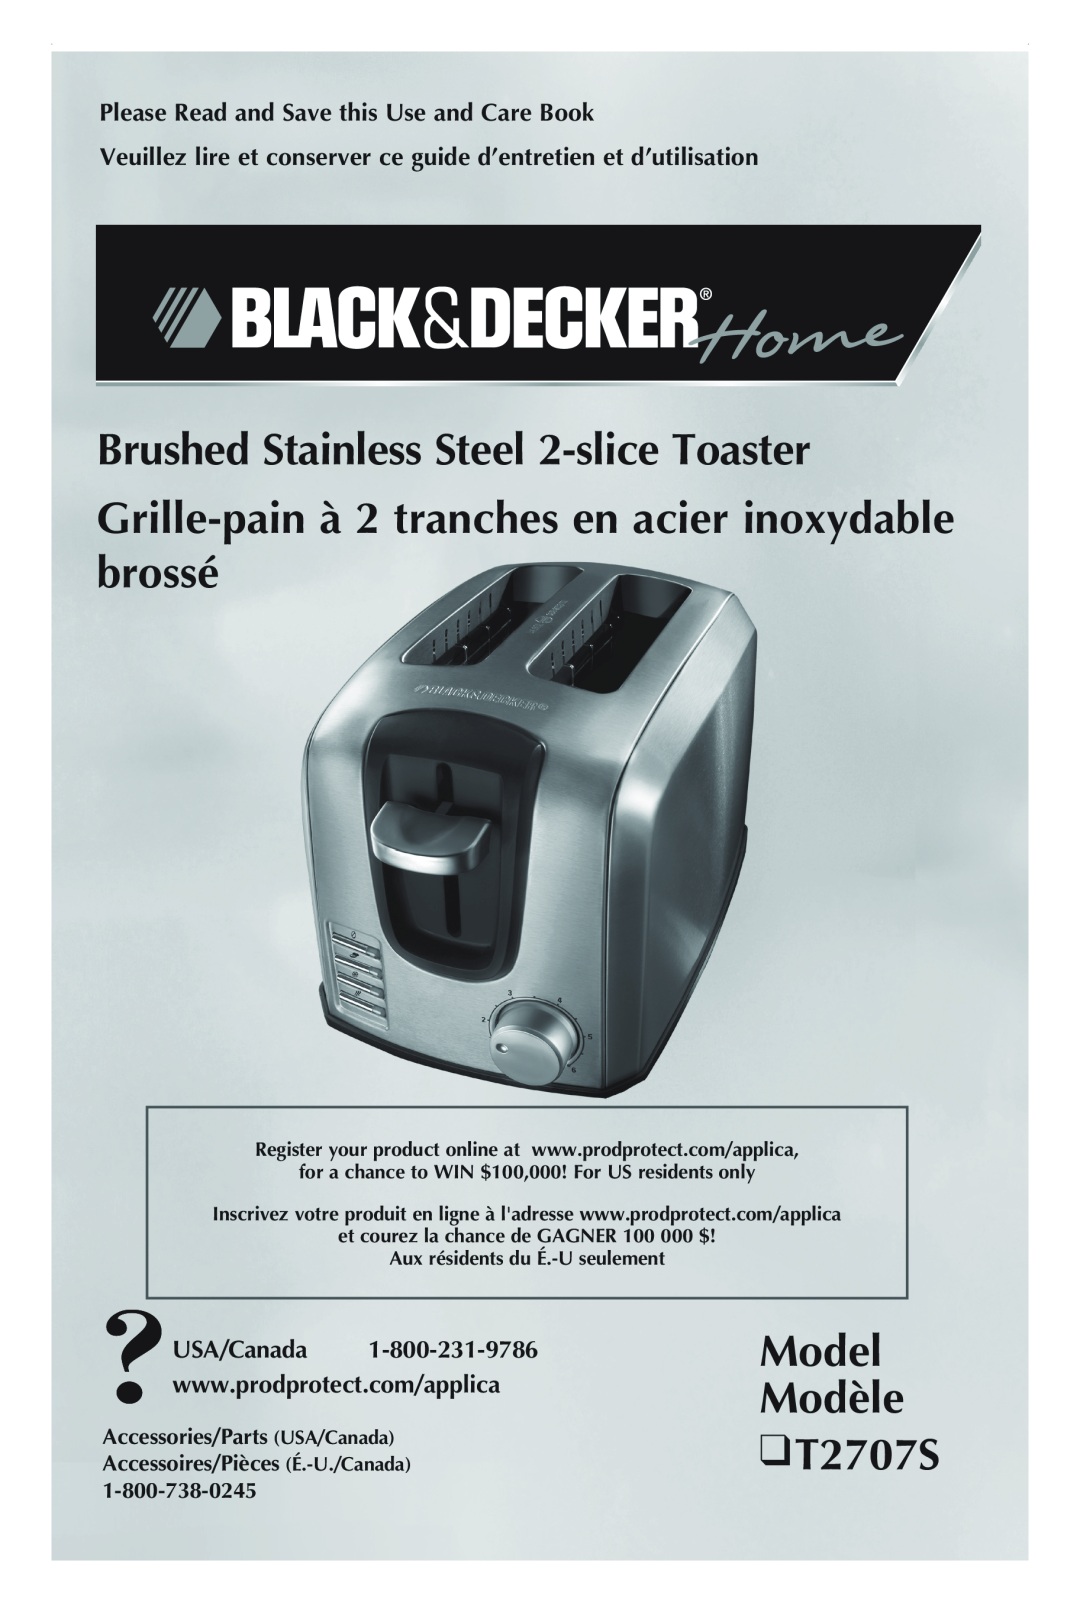 Black & Decker T2707S manual Brushed Stainless Steel 2-slice Toaster, Grille-pain à 2 tranches en acier inoxydable brossé 